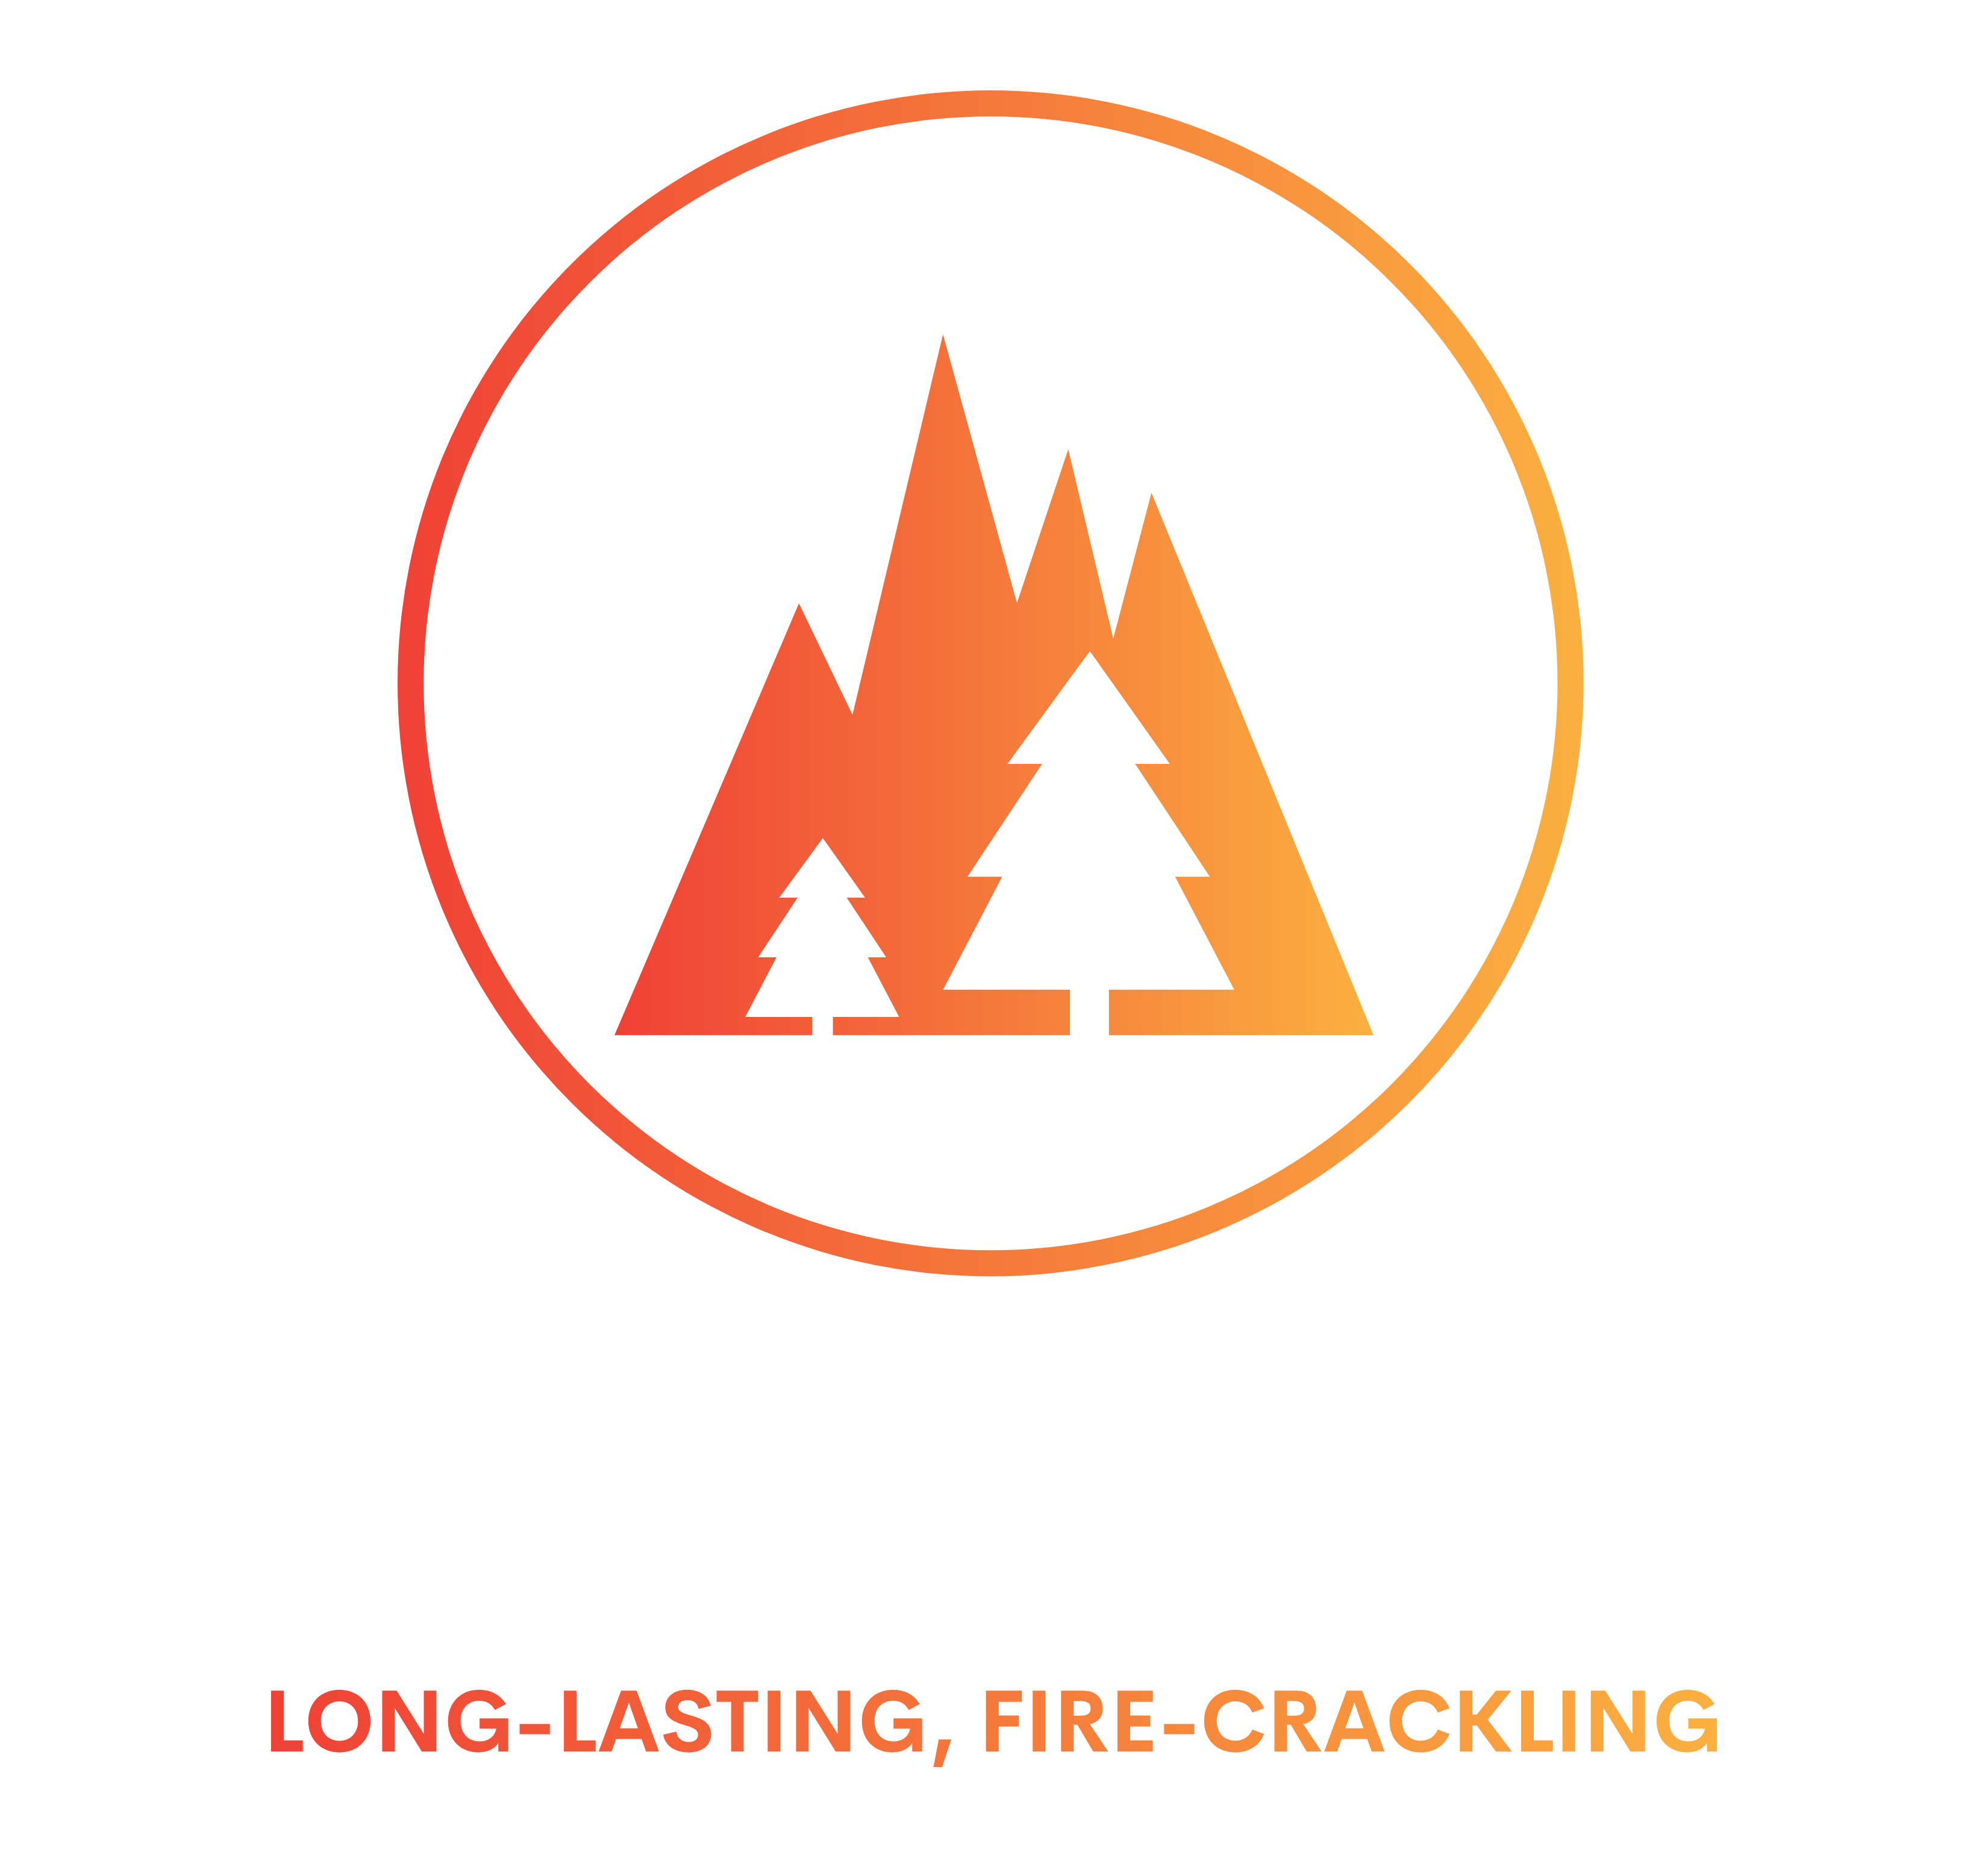 Mountainside Woodwick Candles